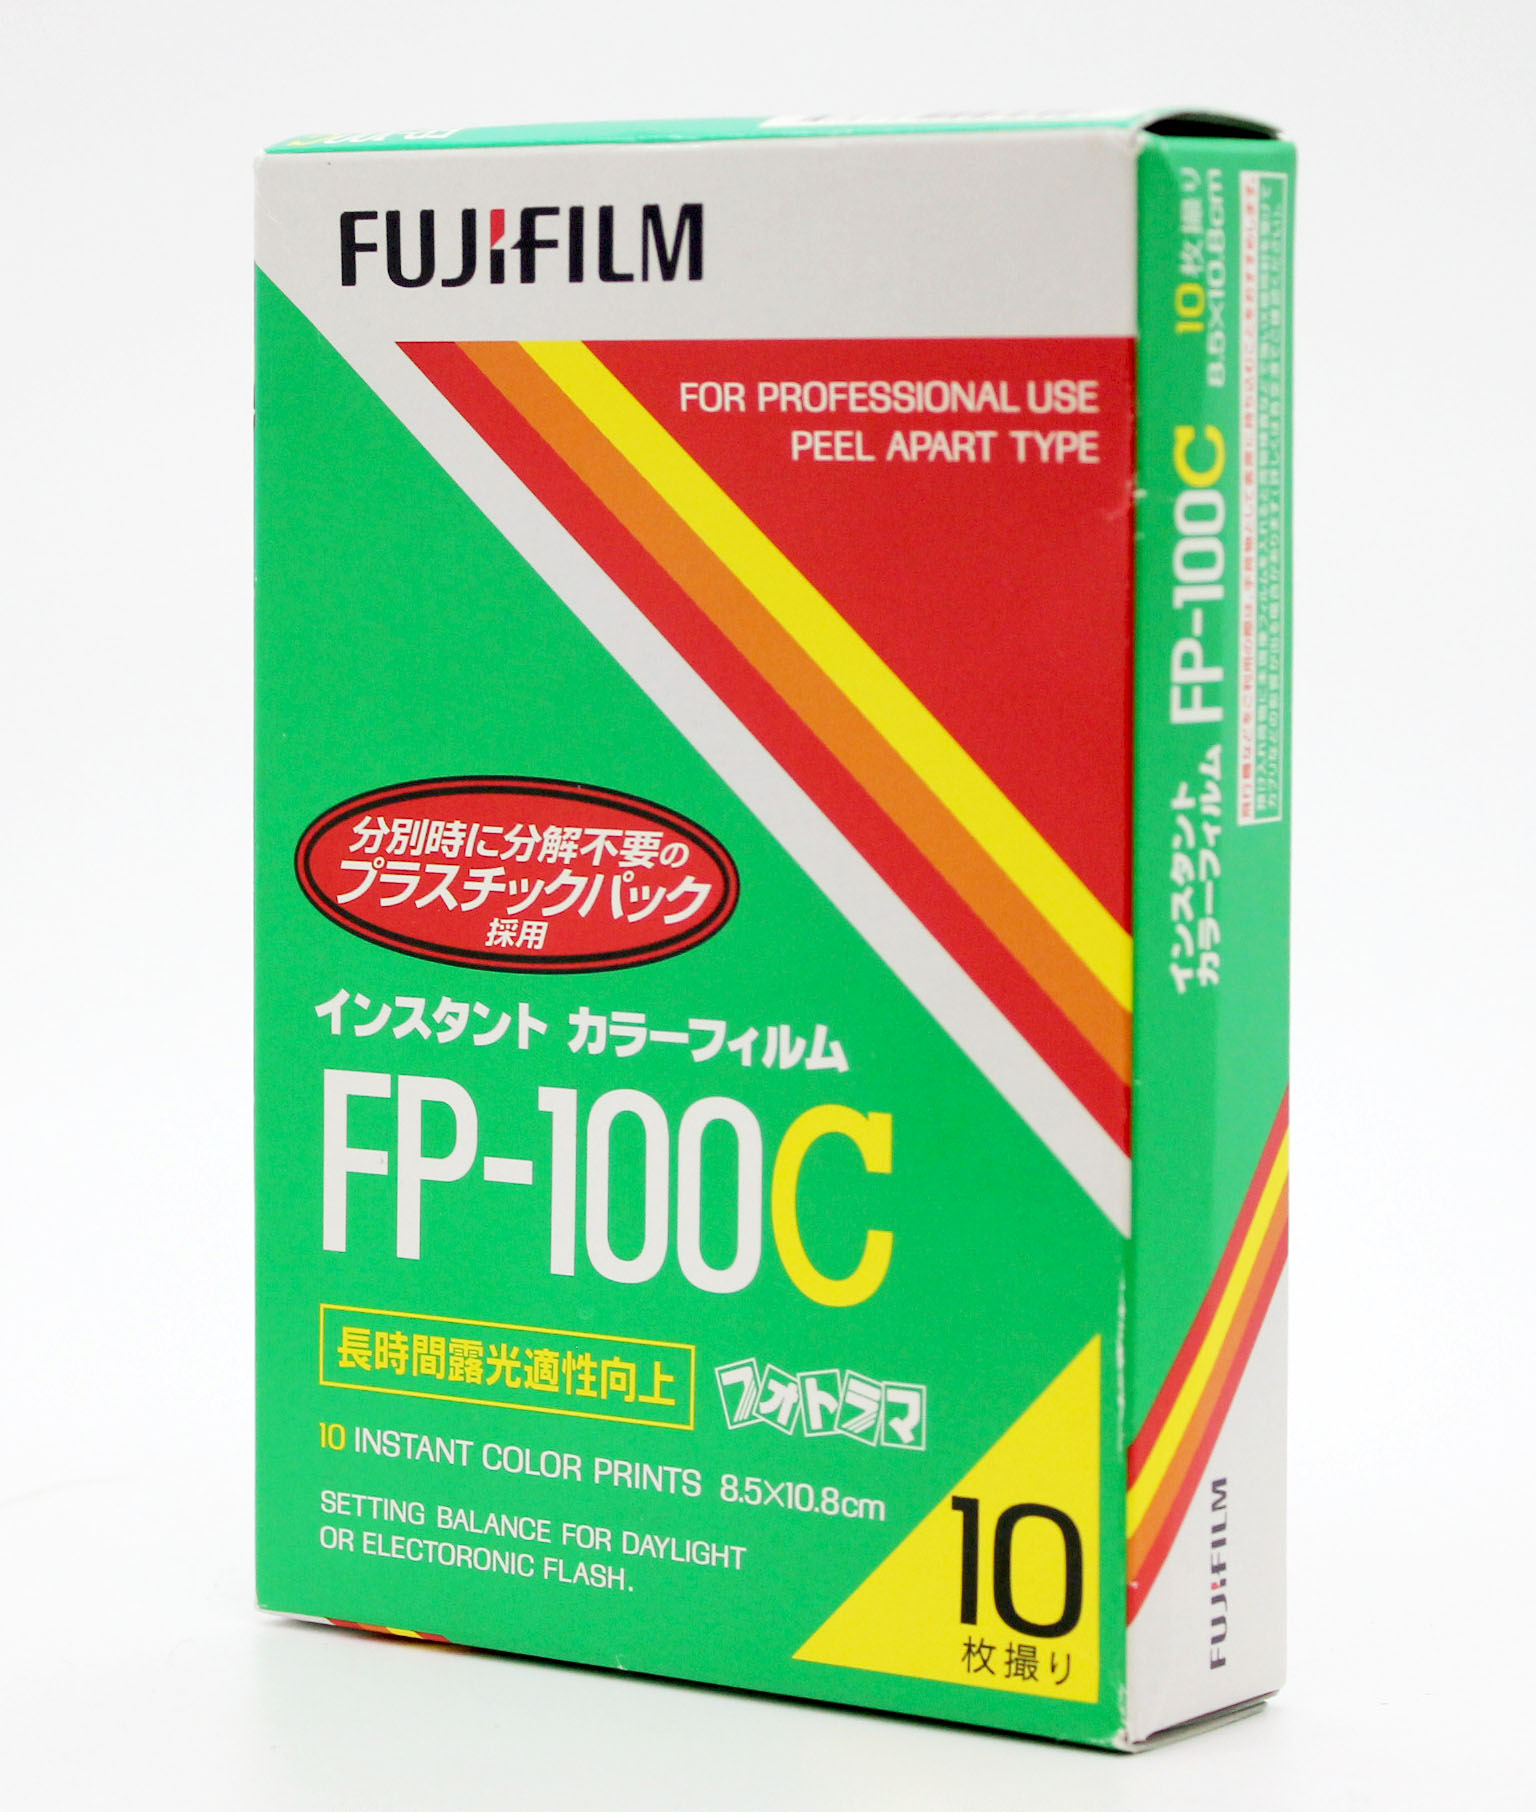  Fujifilm FP-100C Professional Instant Color Film Expired 11/2017 from Japan Photo 0